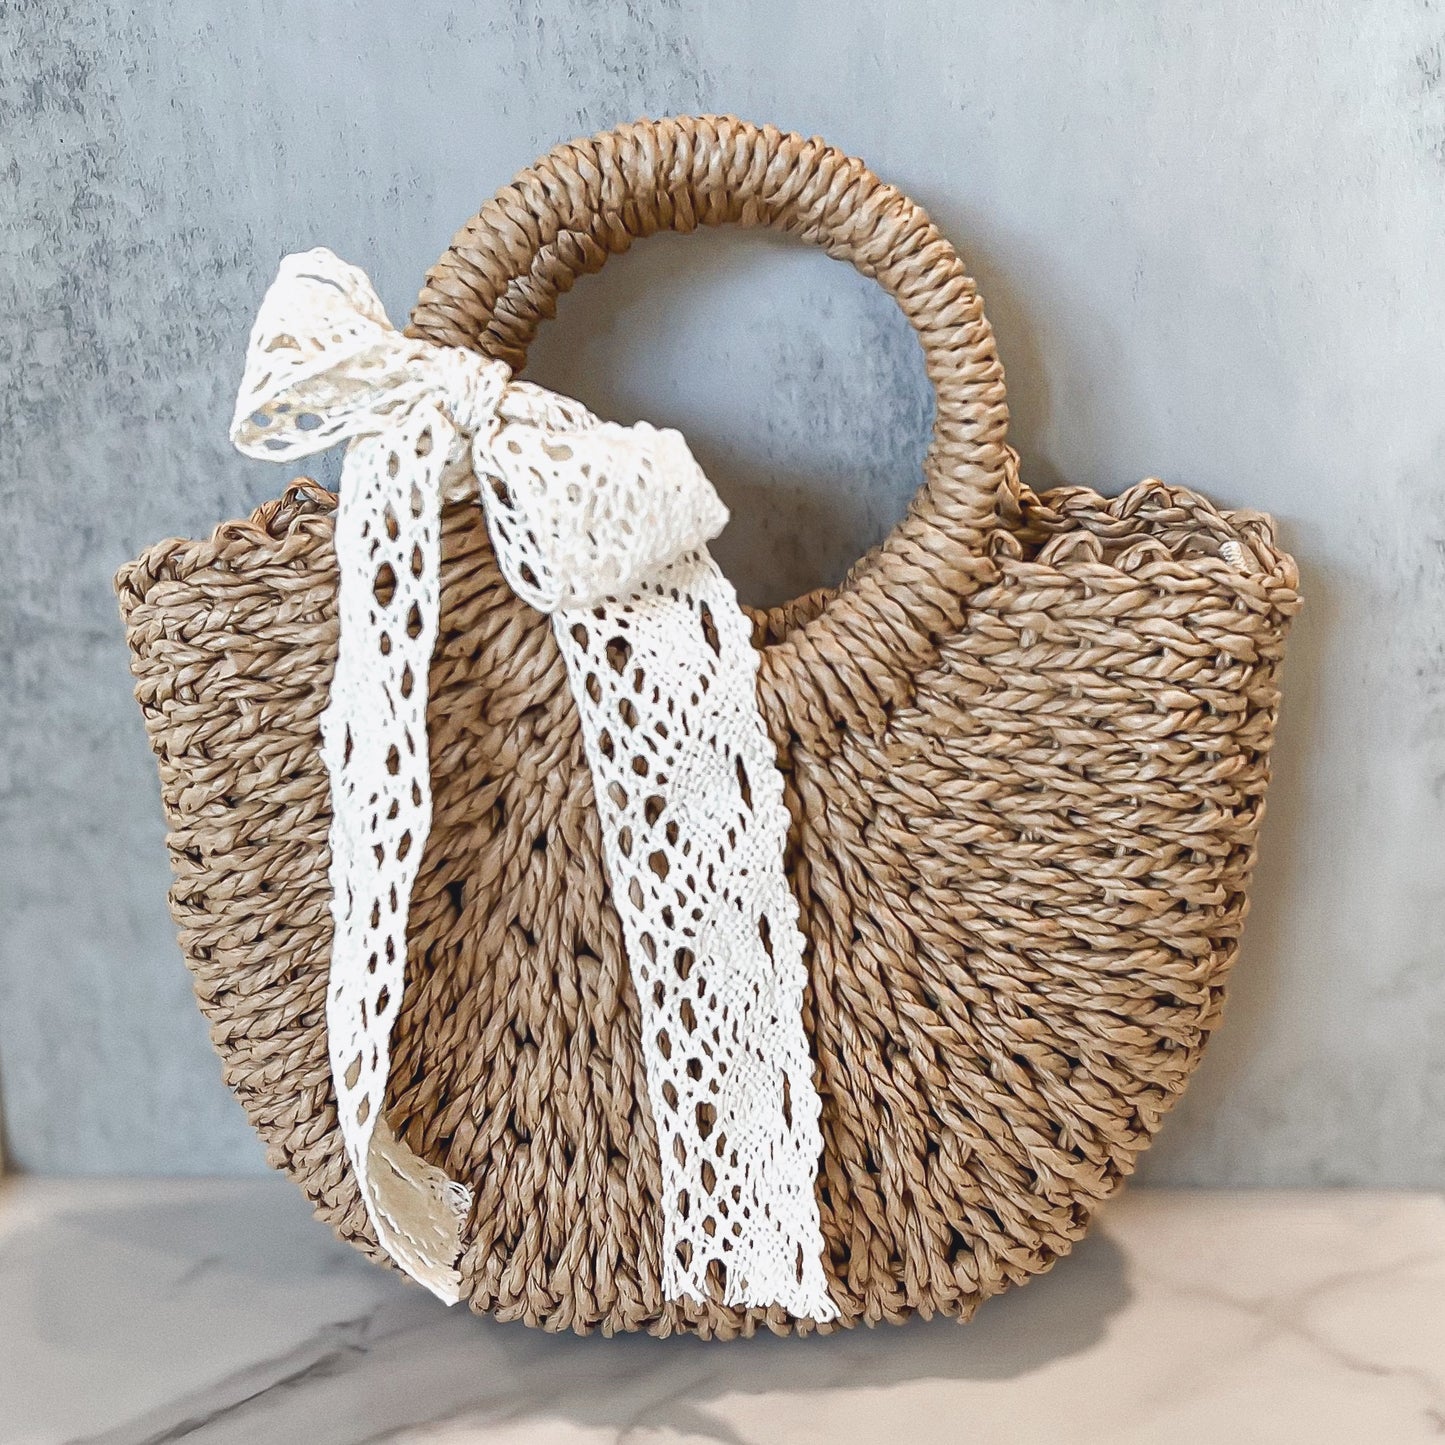 Over the Moon Bag (natural)